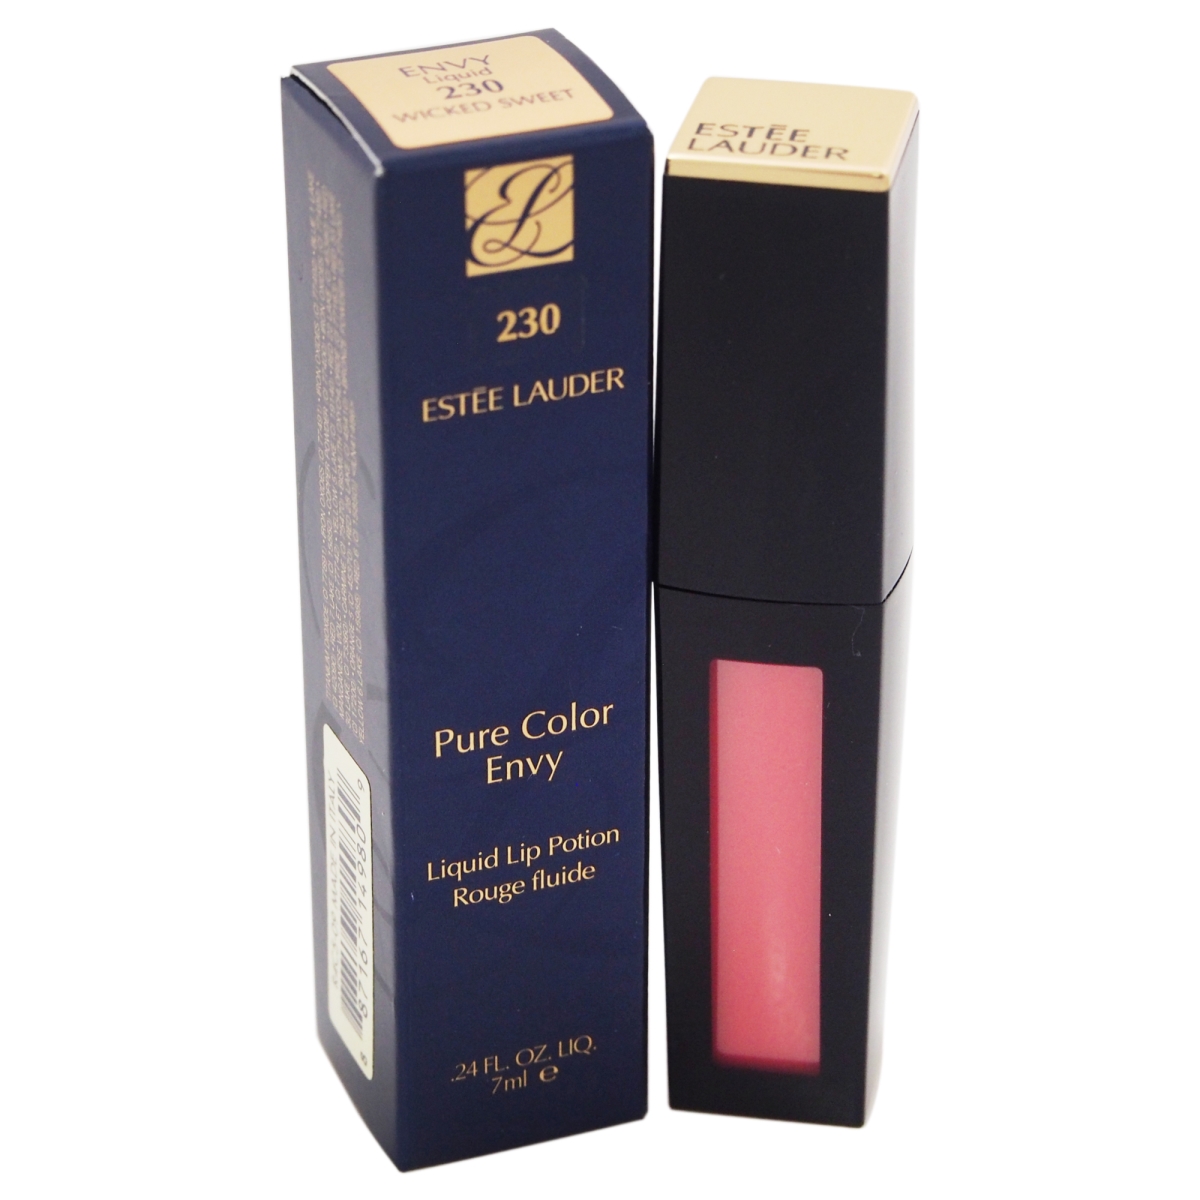 W-c-8569 0.24 Oz No. 230 Pure Color Envy Liquid Wicked Sweet Lip Gloss For Women